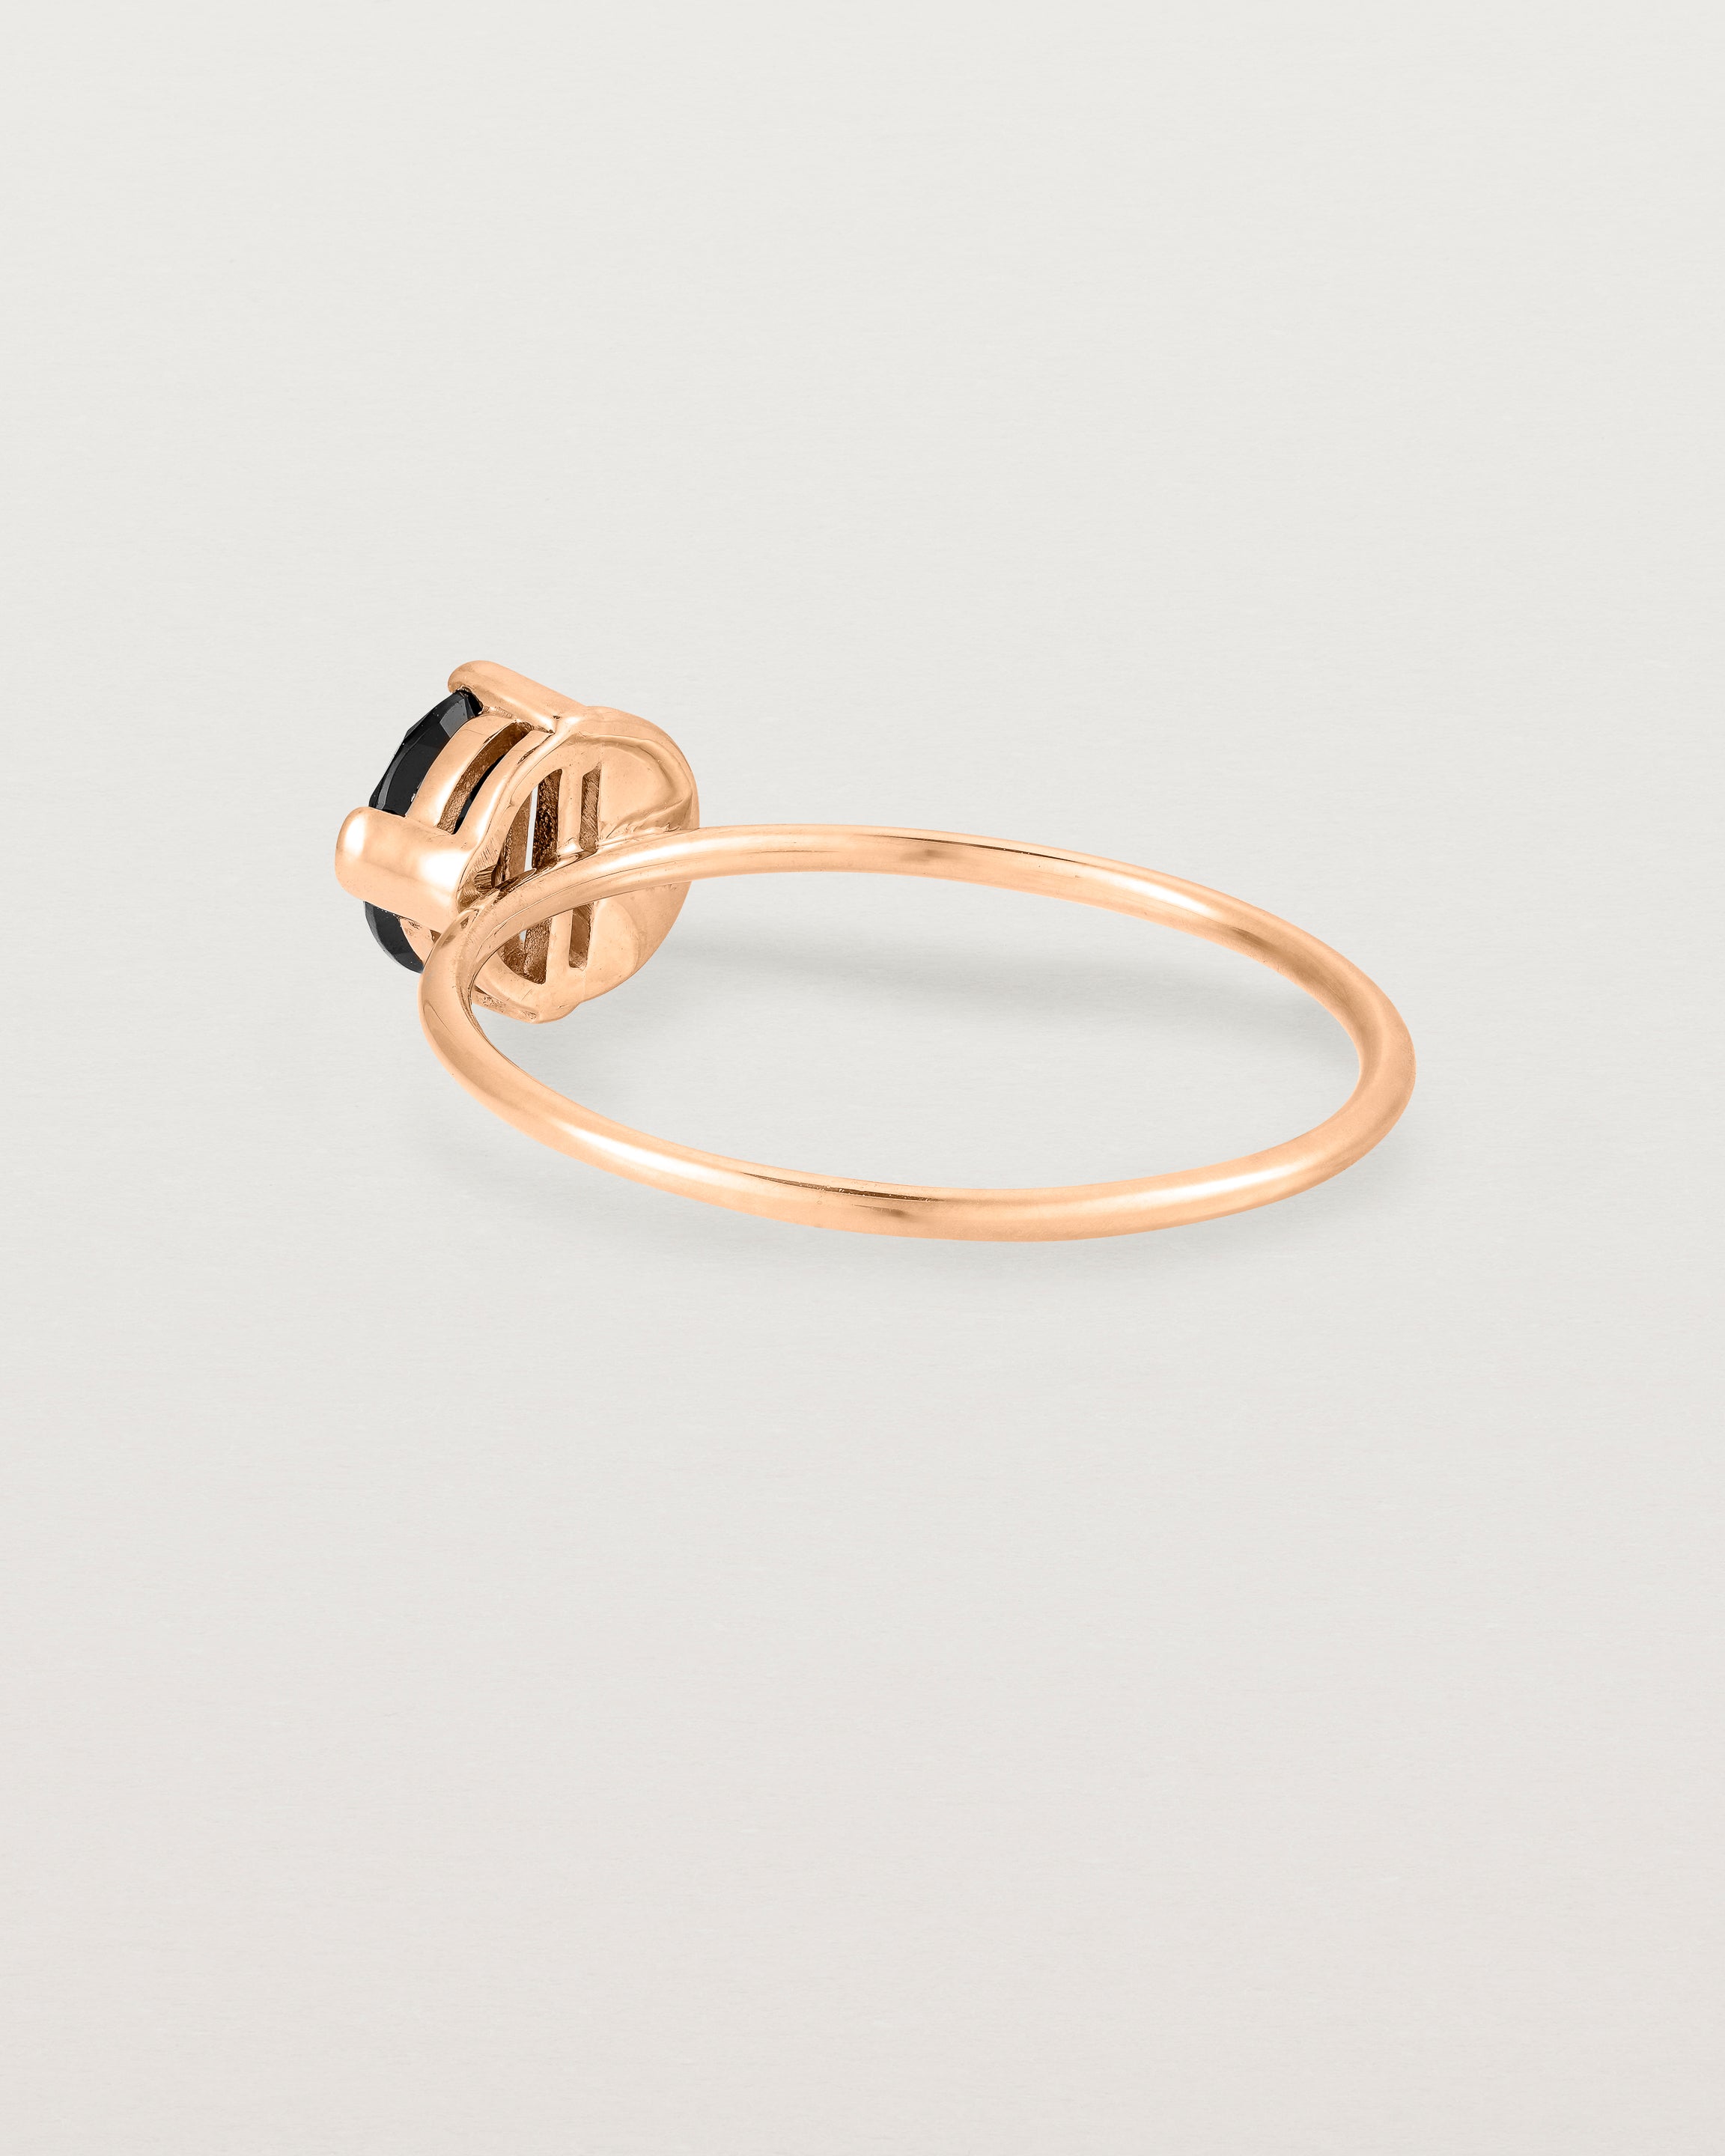 Back view of the Jia Stone Ring | Black Spinel in Rose Gold.